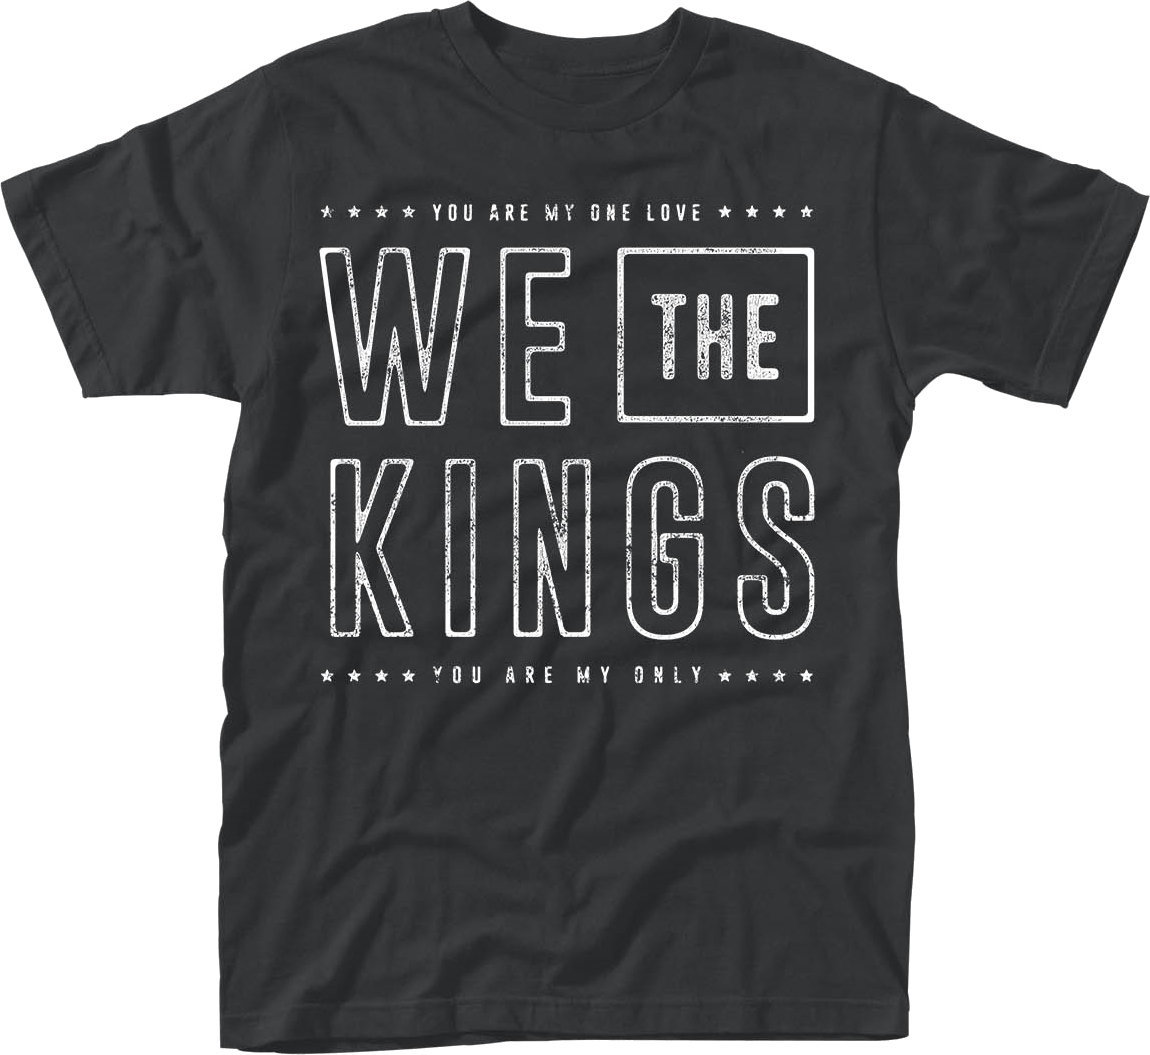 T-Shirt We The Kings T-Shirt You Are My Only Black L